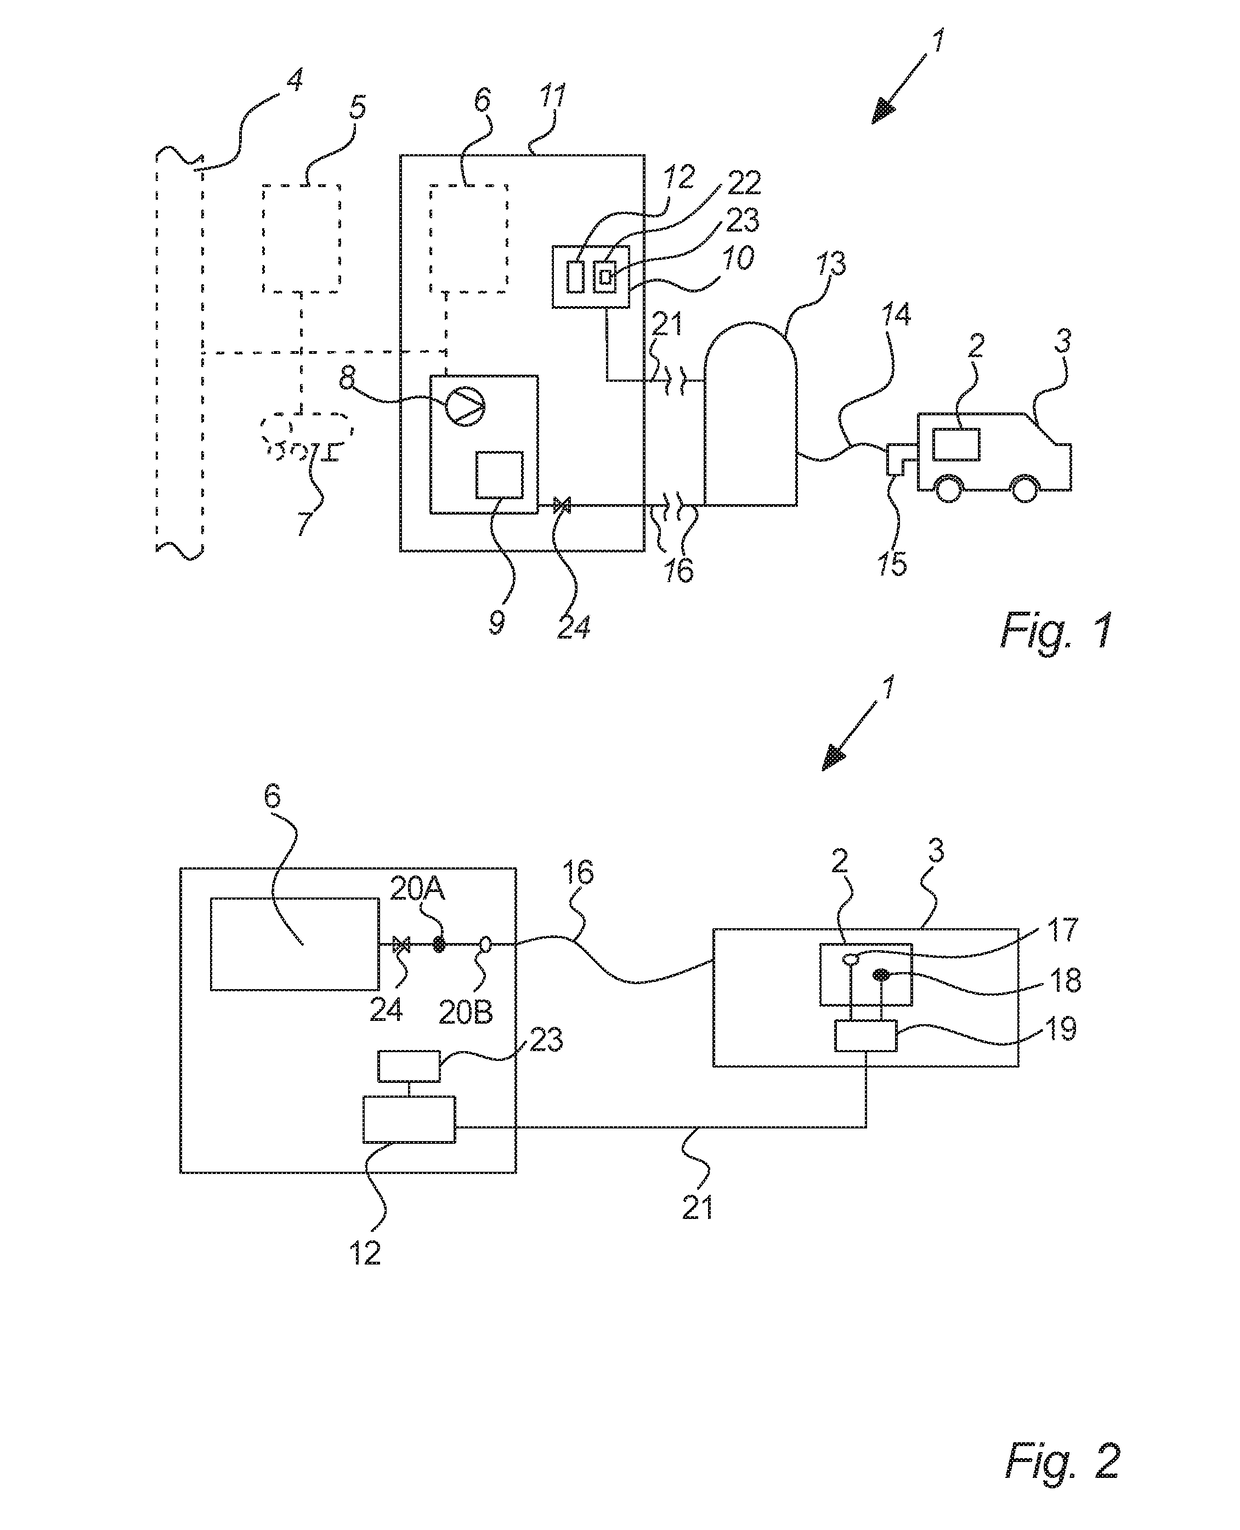 Method of refueling a hydrogen vehicle